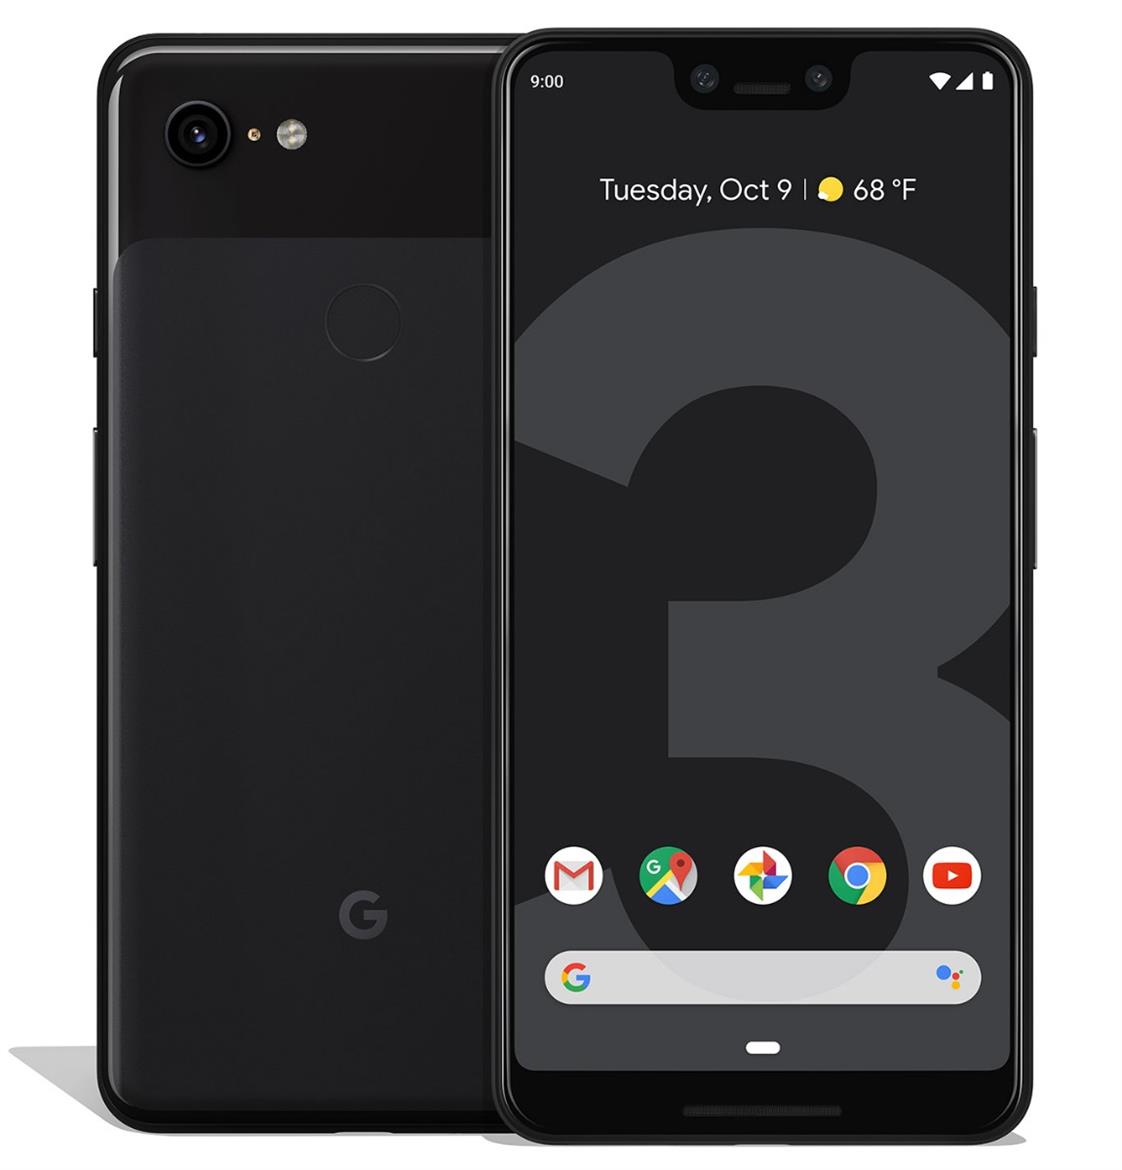 Google Pixel 3 And Pixel 3 XL Review: Killer Camera, Android Refined